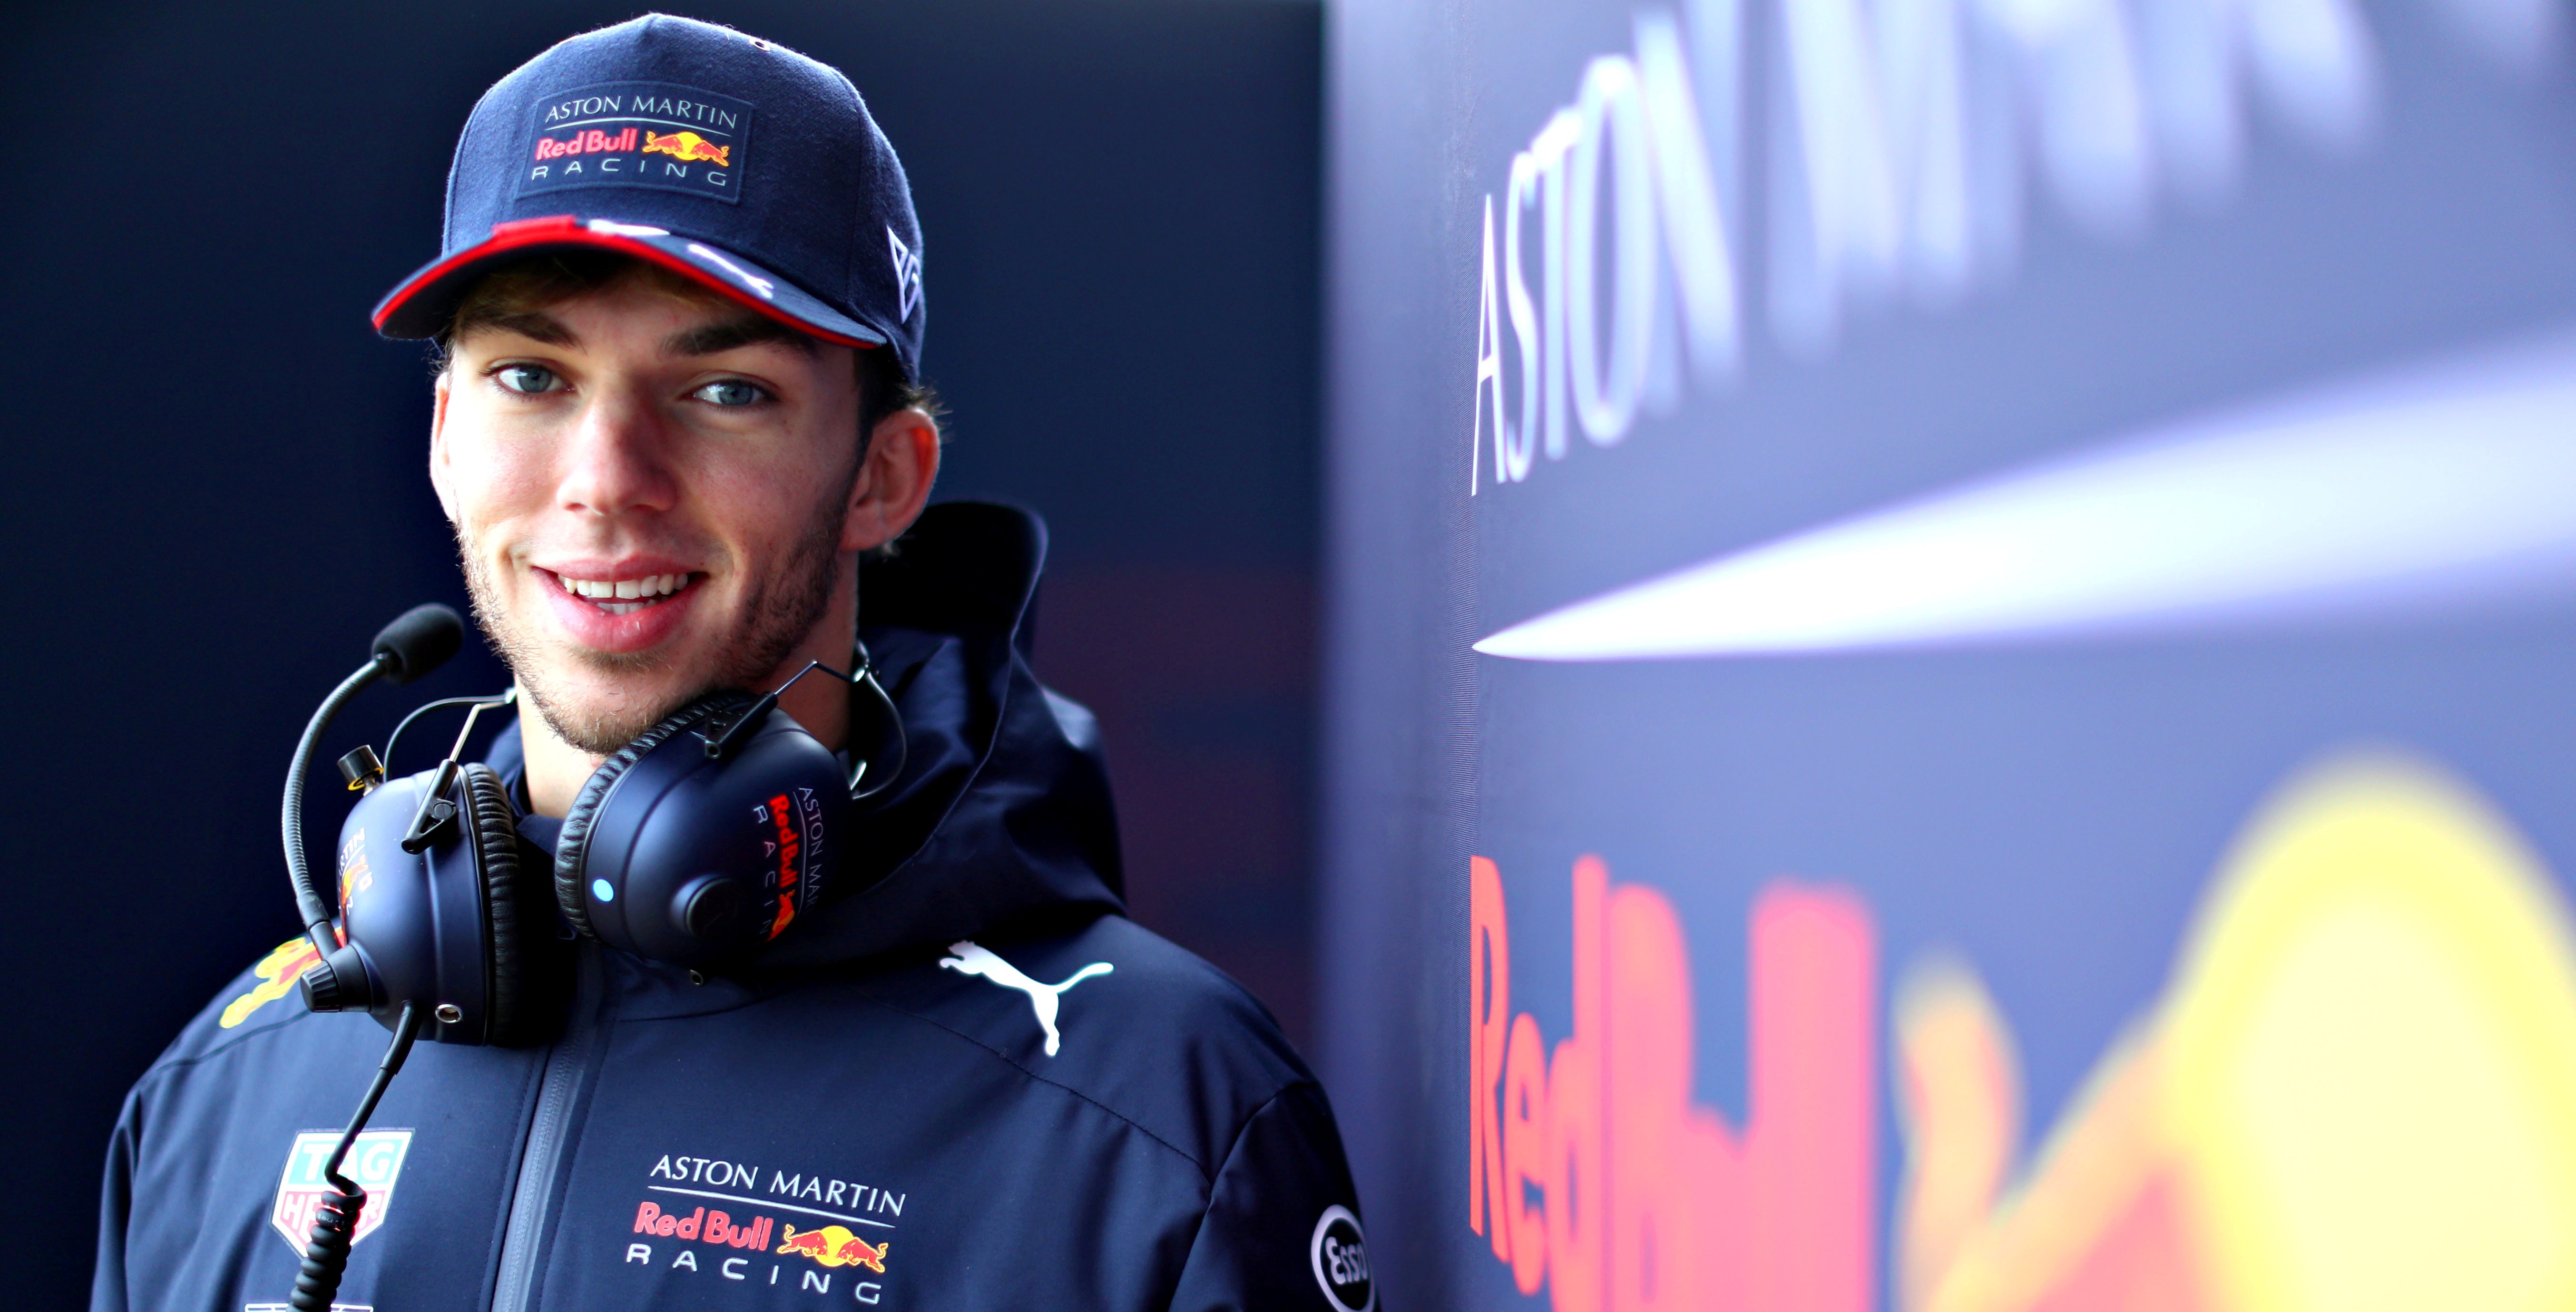 On The Rise – Pierre Gasly On Joining Red Bull And His Hopes For F1